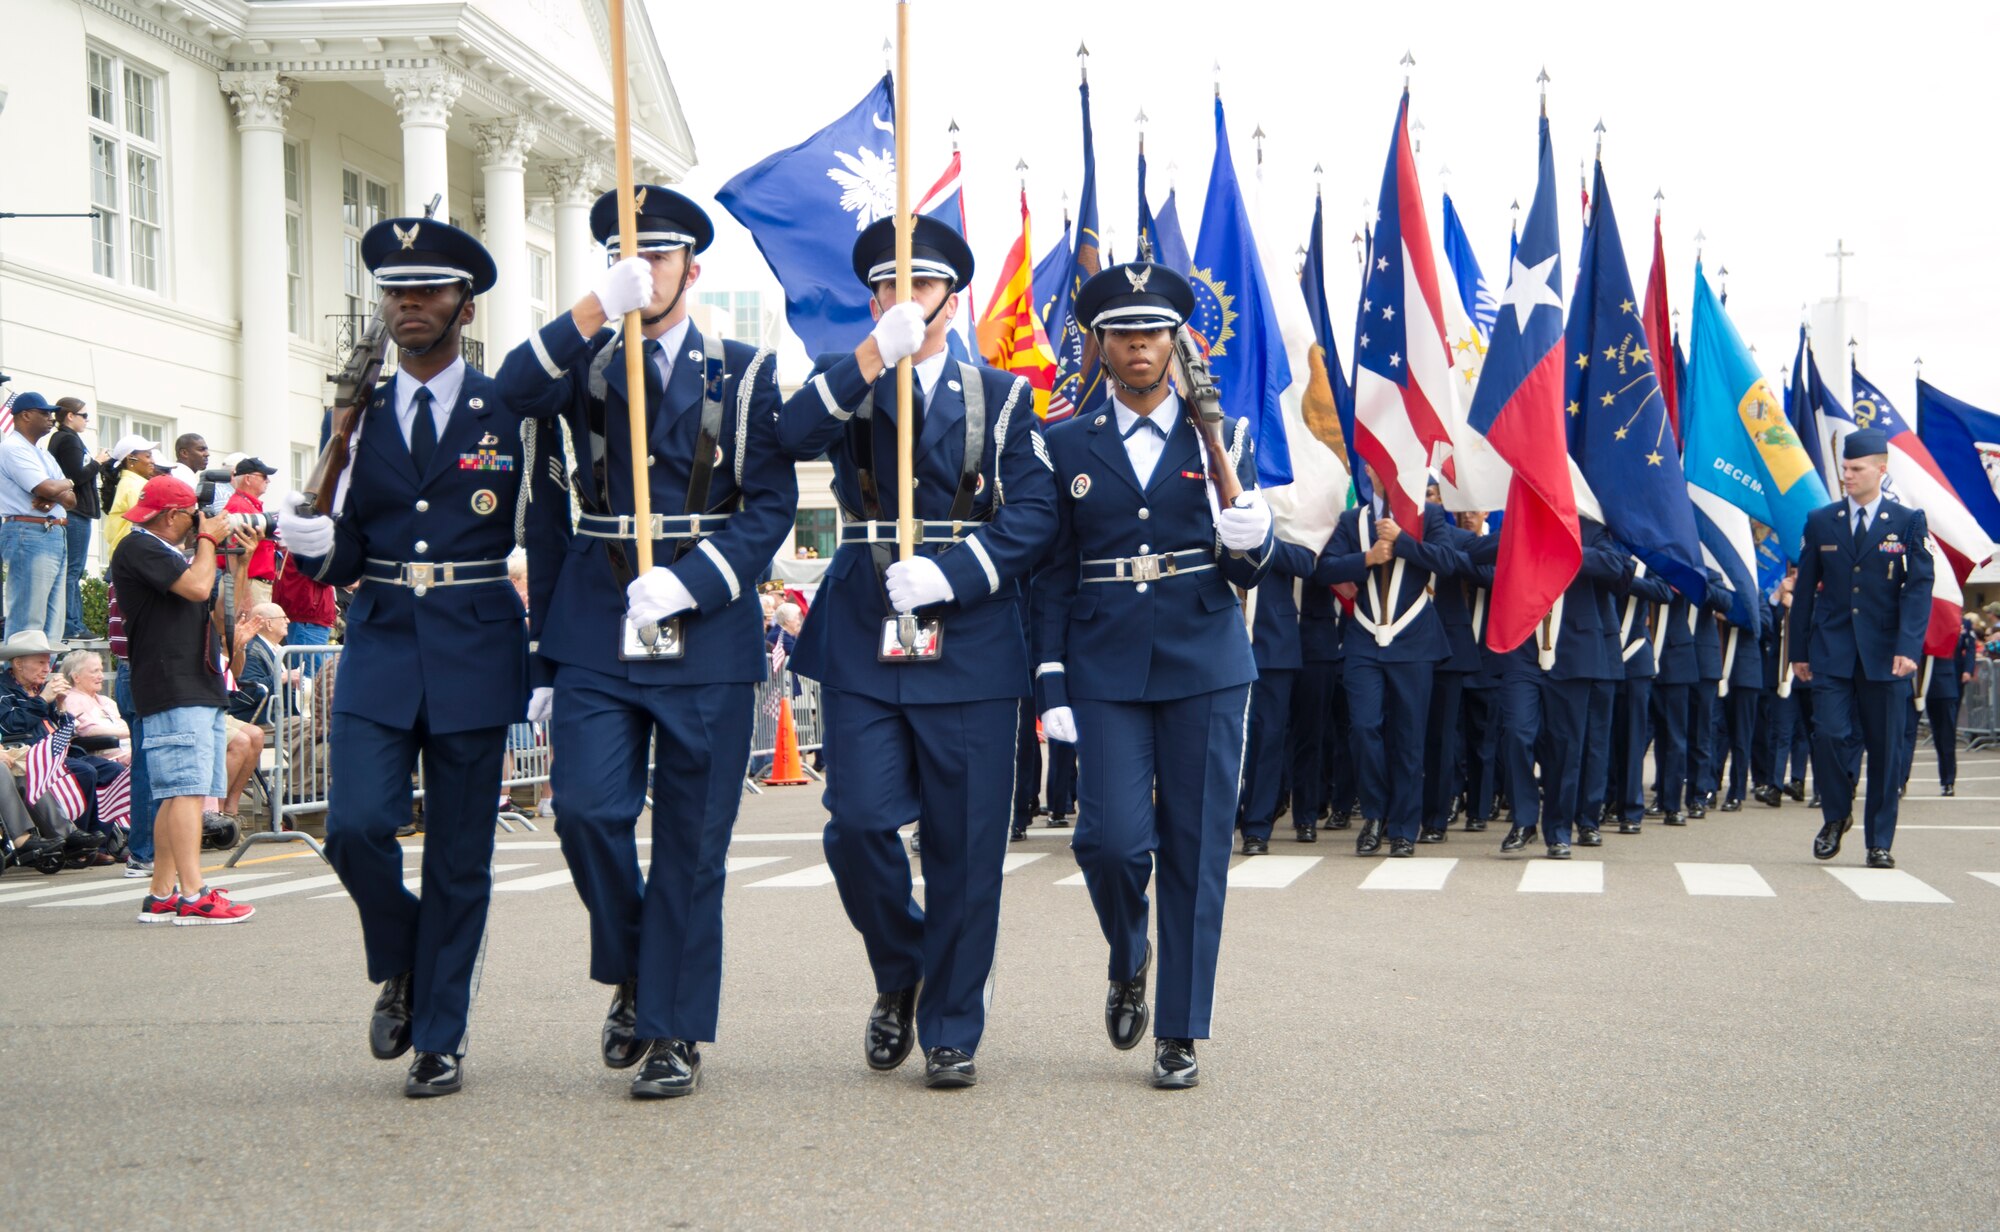 Airmen from Keesler Air Force Base, Miss., march in the 12th annual Gulf Coast Veteran's Parade Nov. 10, 2012, in Gulfport.   Keesler marching units included the honor guard, the 50 state flags carried by the 334th Training Squadron, student marching groups from the 335th and 336th Training Squadrons and the 81st Training Group’s drum and bugle corps.  (U.S. Air Force photo by Adam Bond)